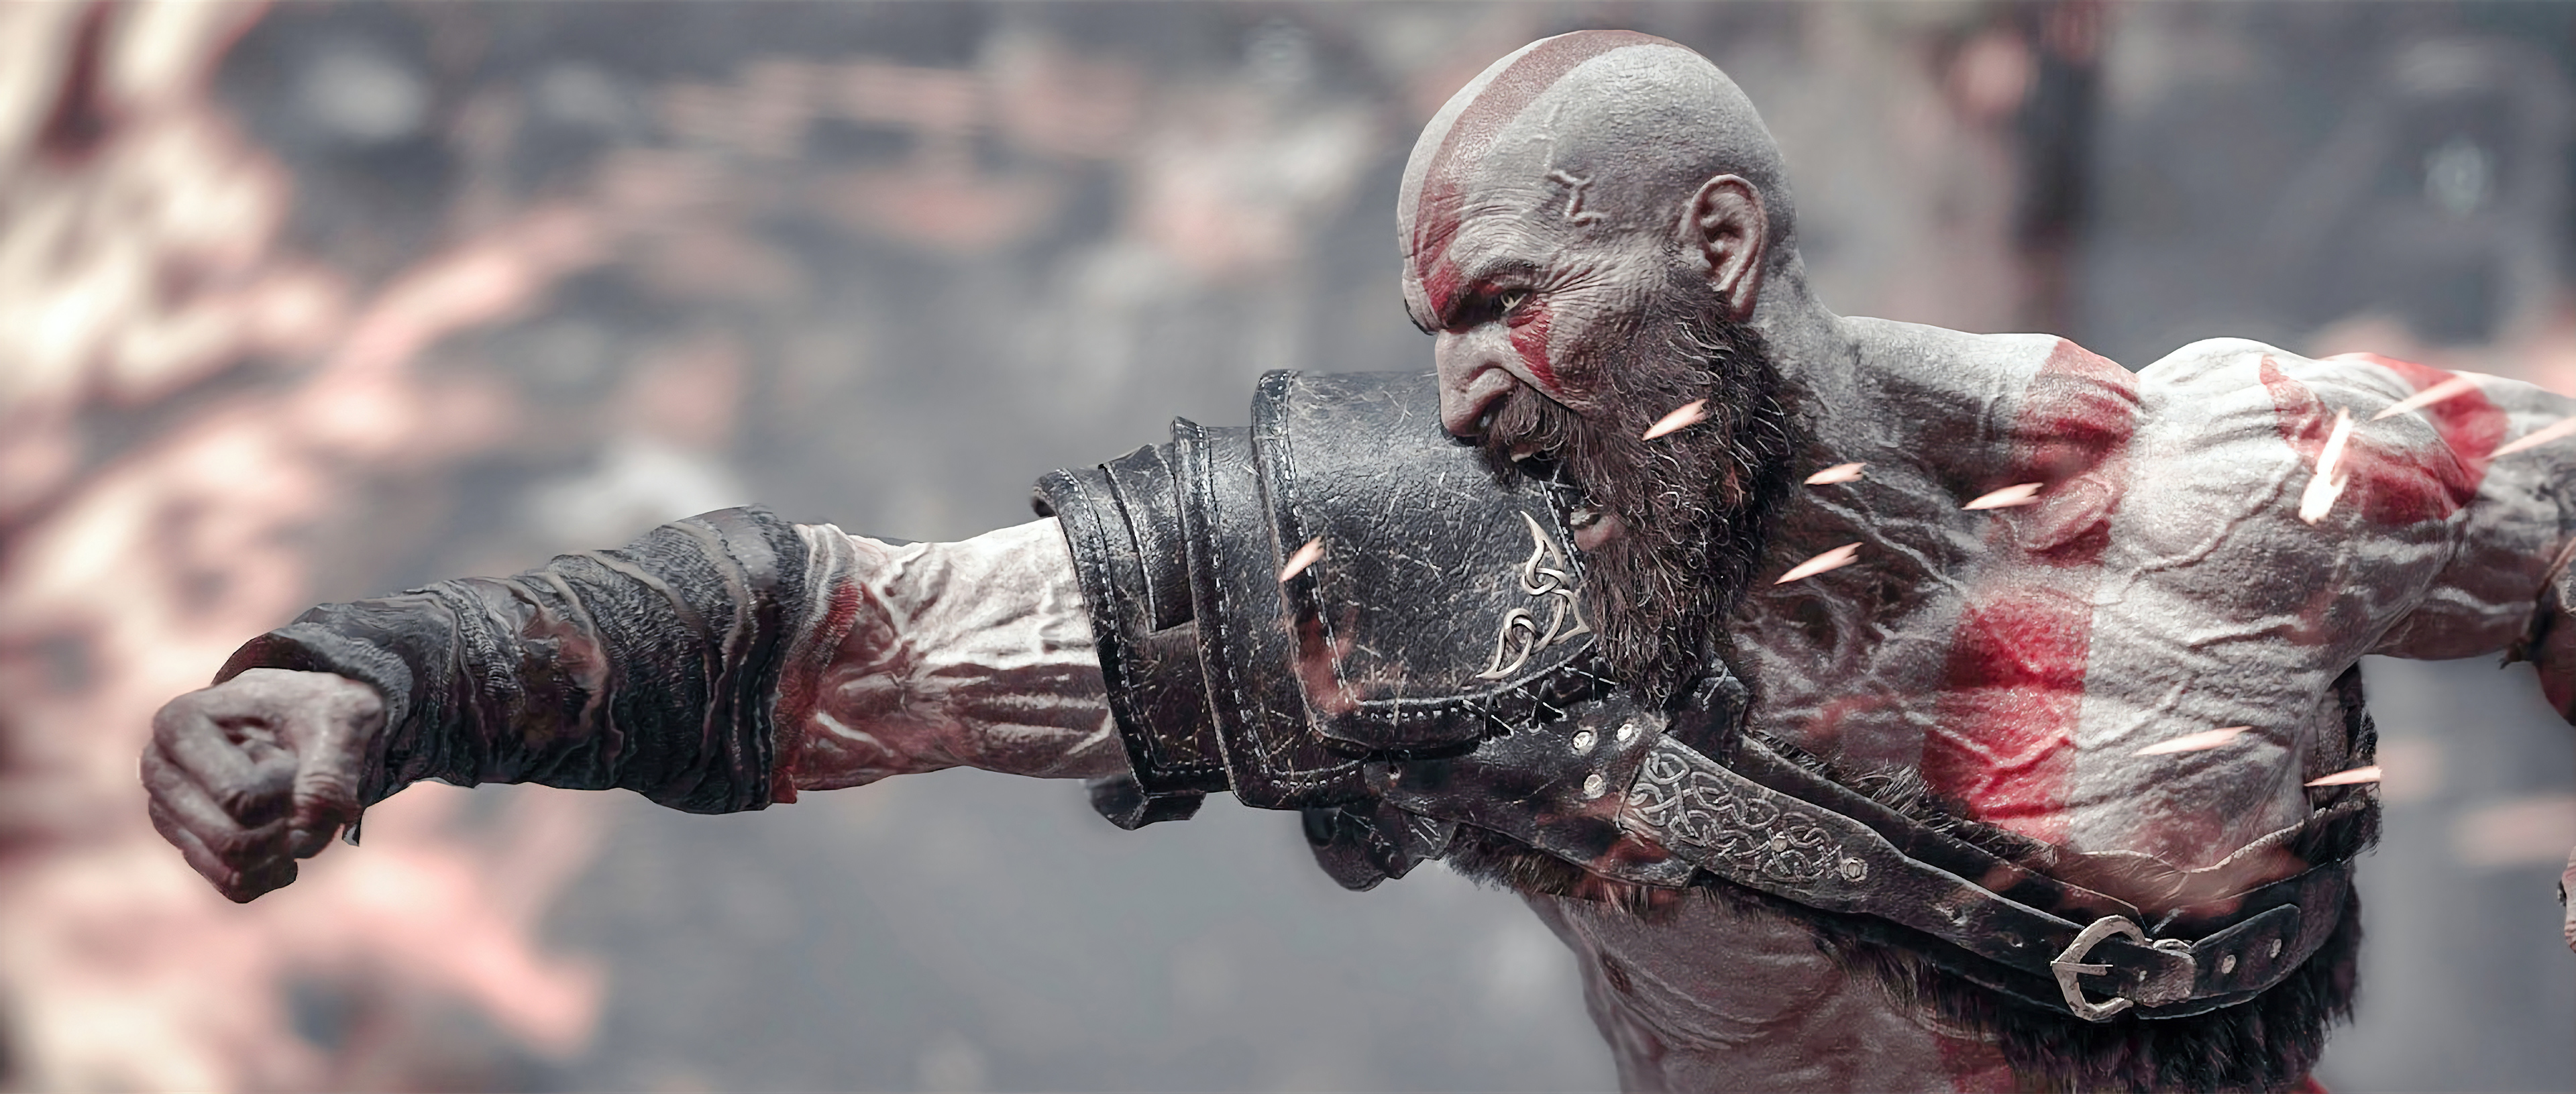 Free photo A picture from God Of War 4